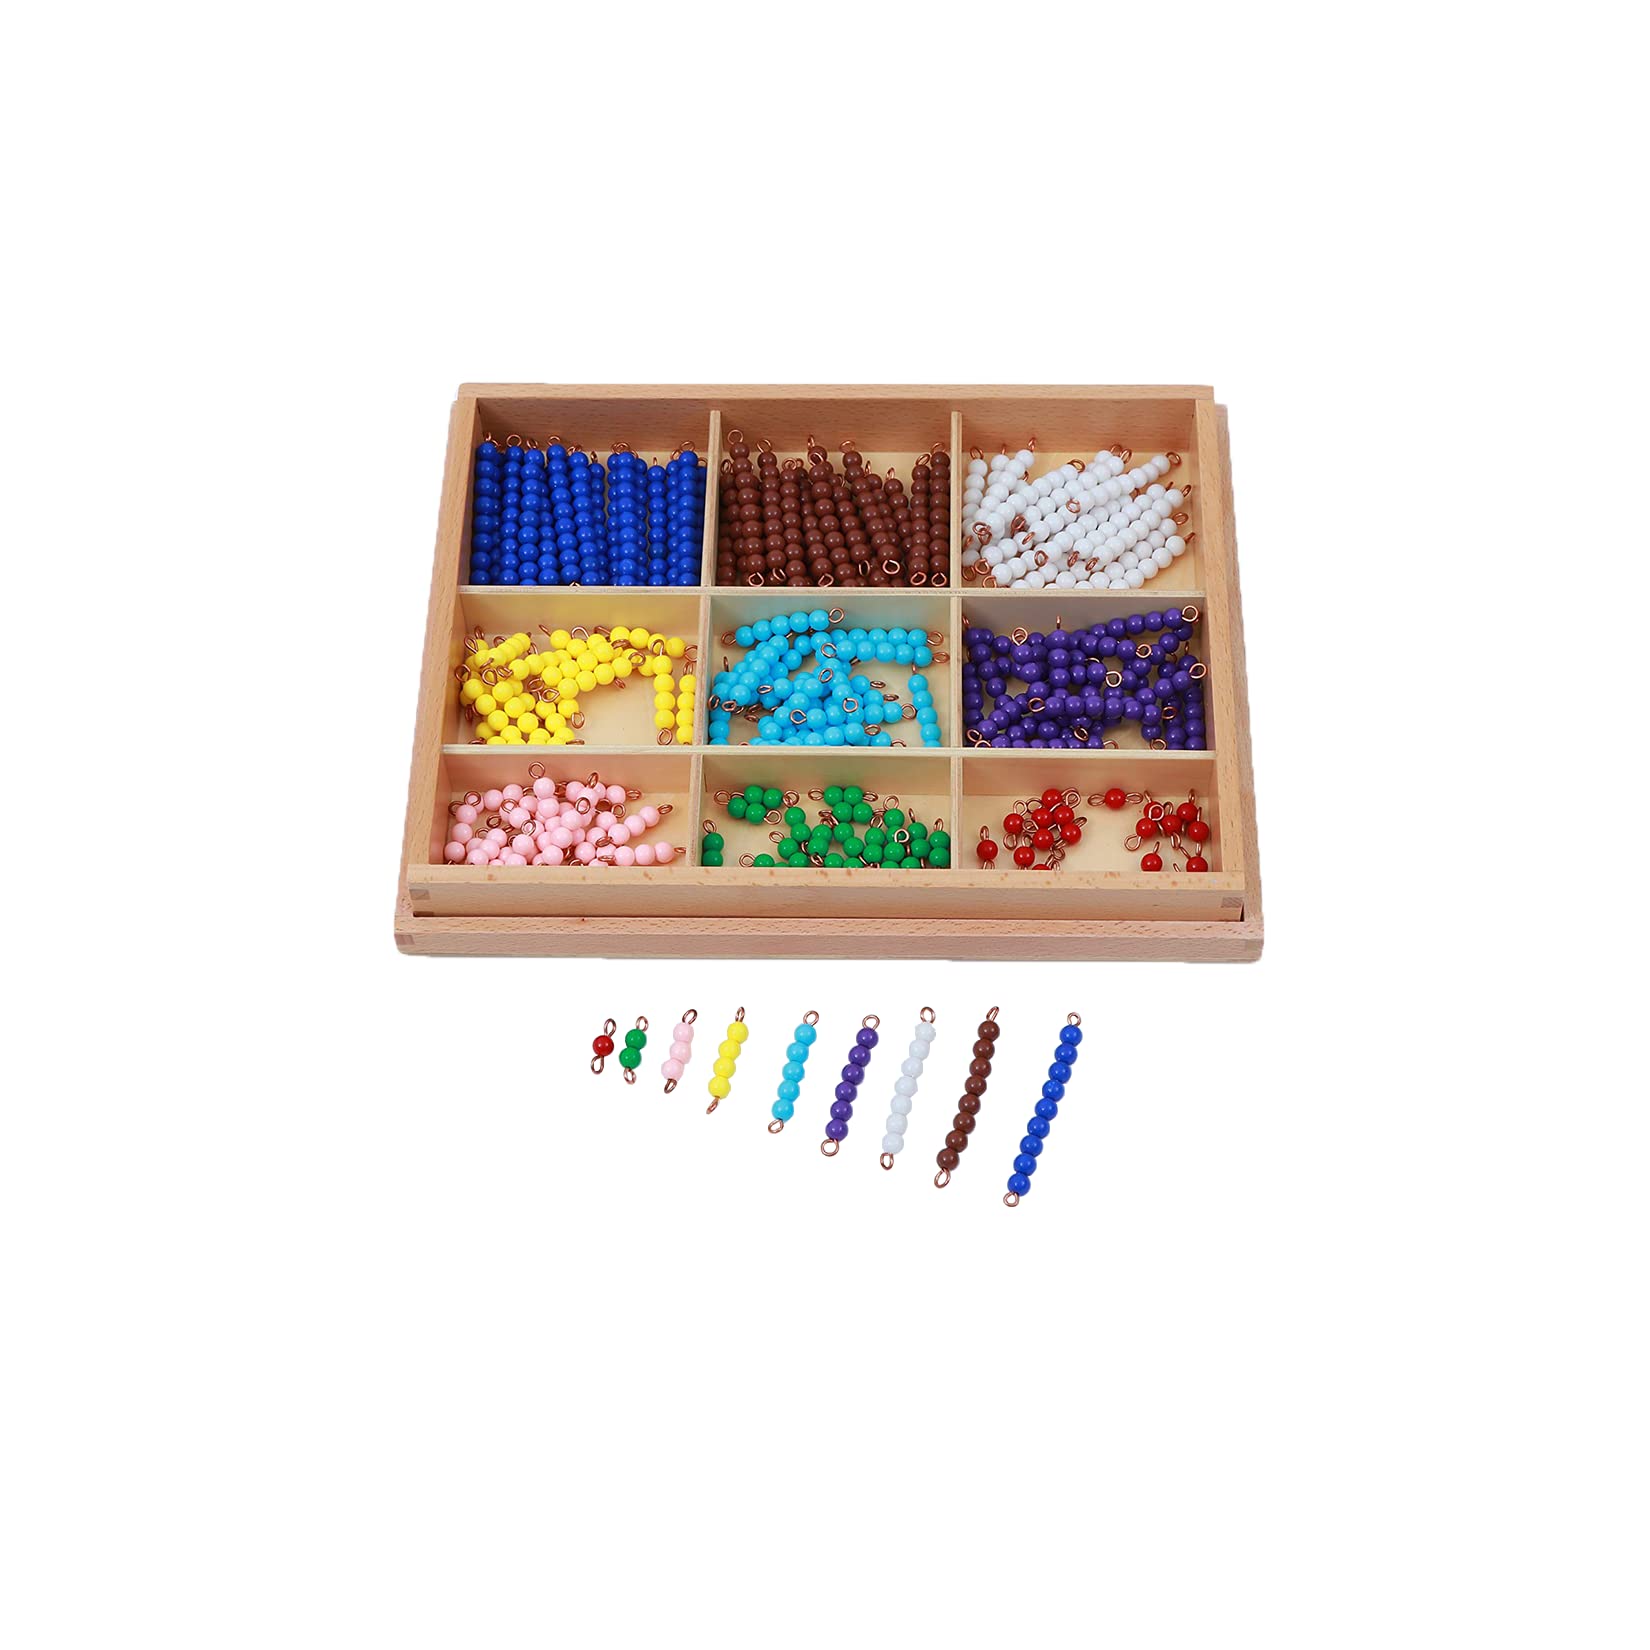 Adena Montessori Counting Beads Checker Board Beads Math Games & Teaching Numbers Counting Toys